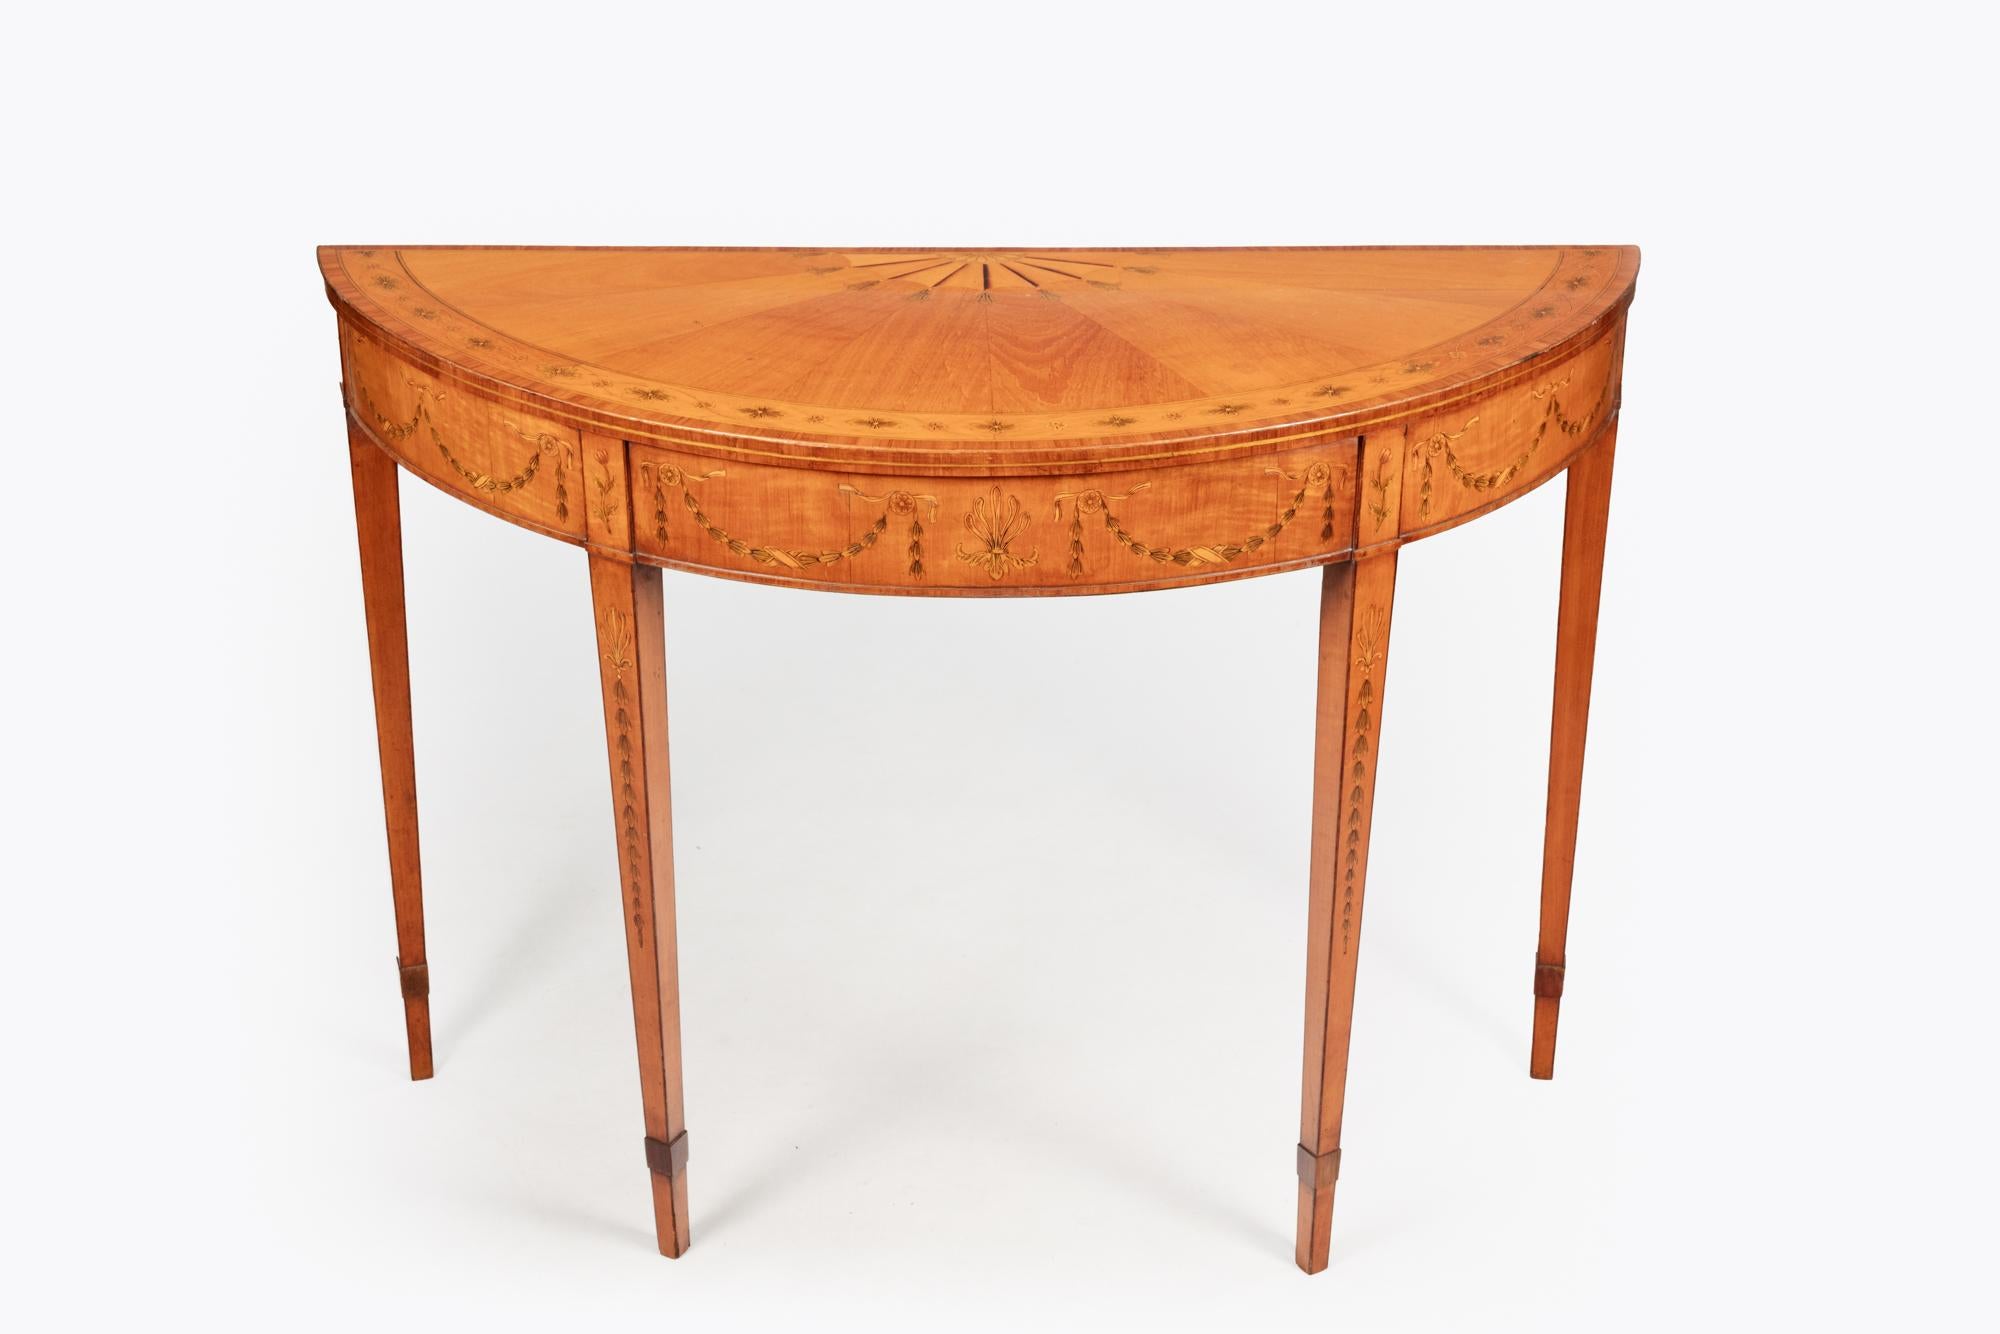 George III pair of satinwood and fruitwood marquetry demi lune tables the top with radiating veneers and an eliptical border centred by a fan motif.
In the style of William Moore of Dublin. Circa 1810.